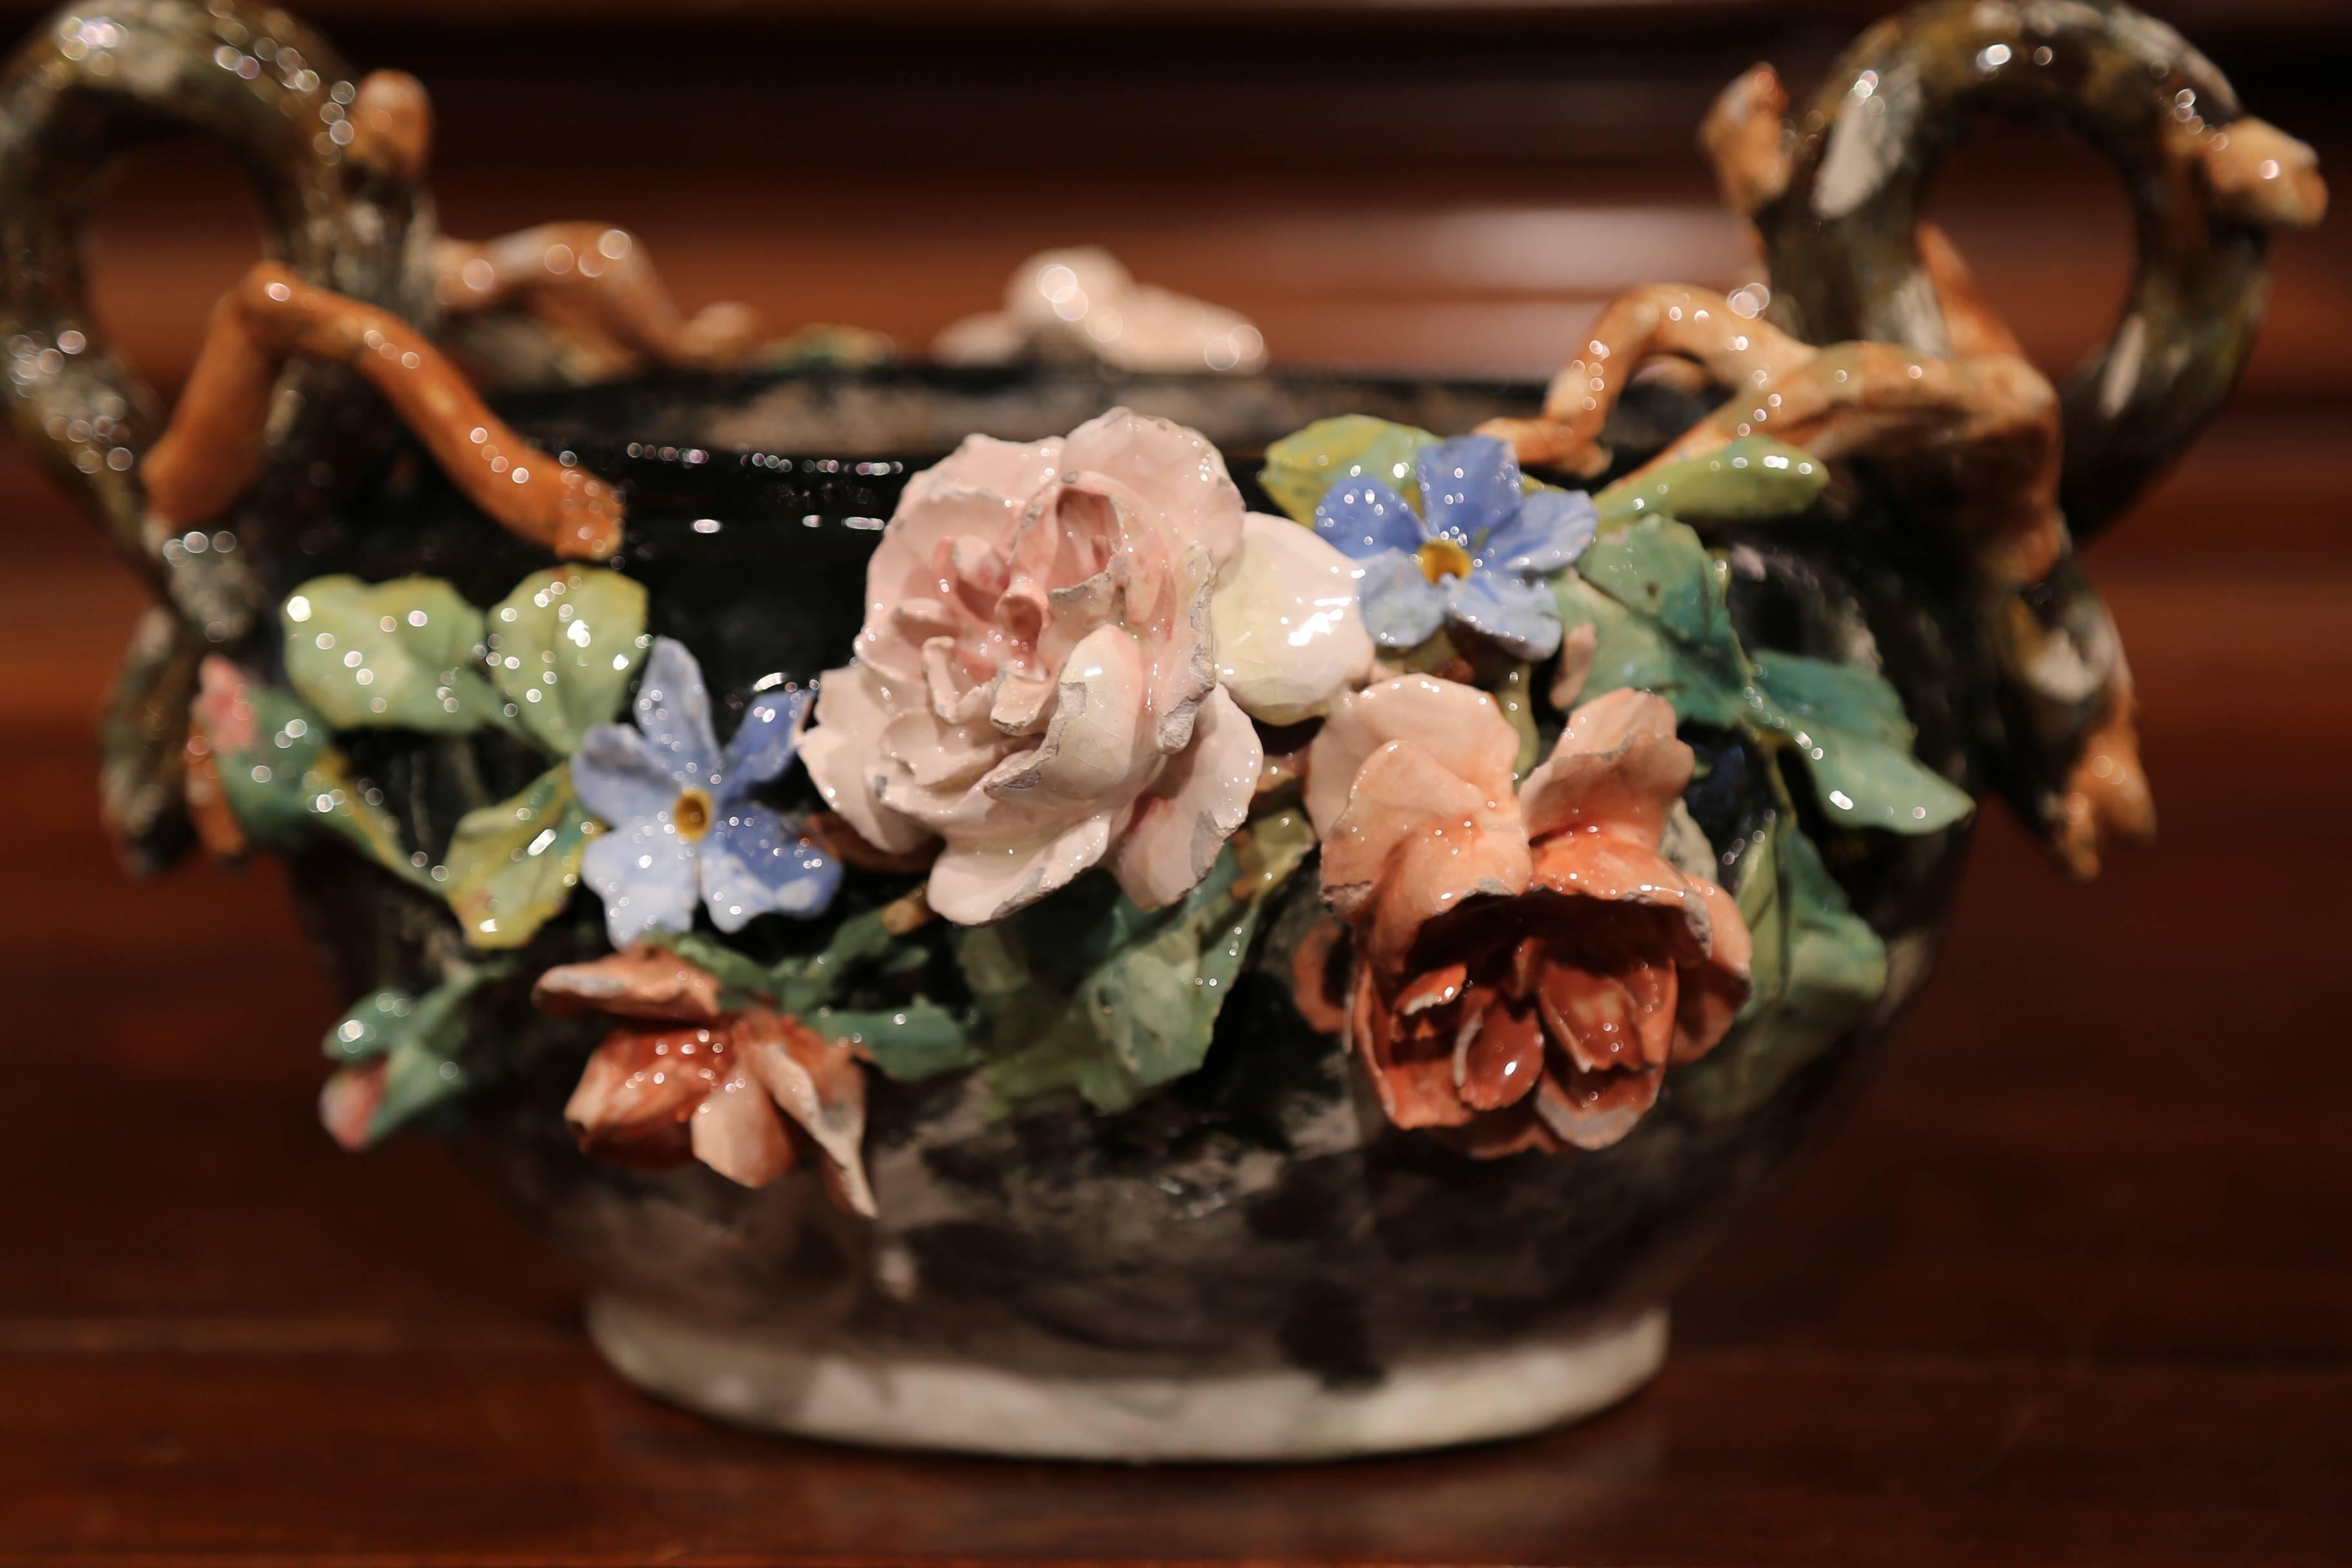 This elegant colorful hand painted Majolica planter was sculpted in Montigny sur Loing, France, circa 1860. The ceramic jardinière with root shape handles features high relief soft pink, blue and beige rose flowers with pale green leaves, and brown